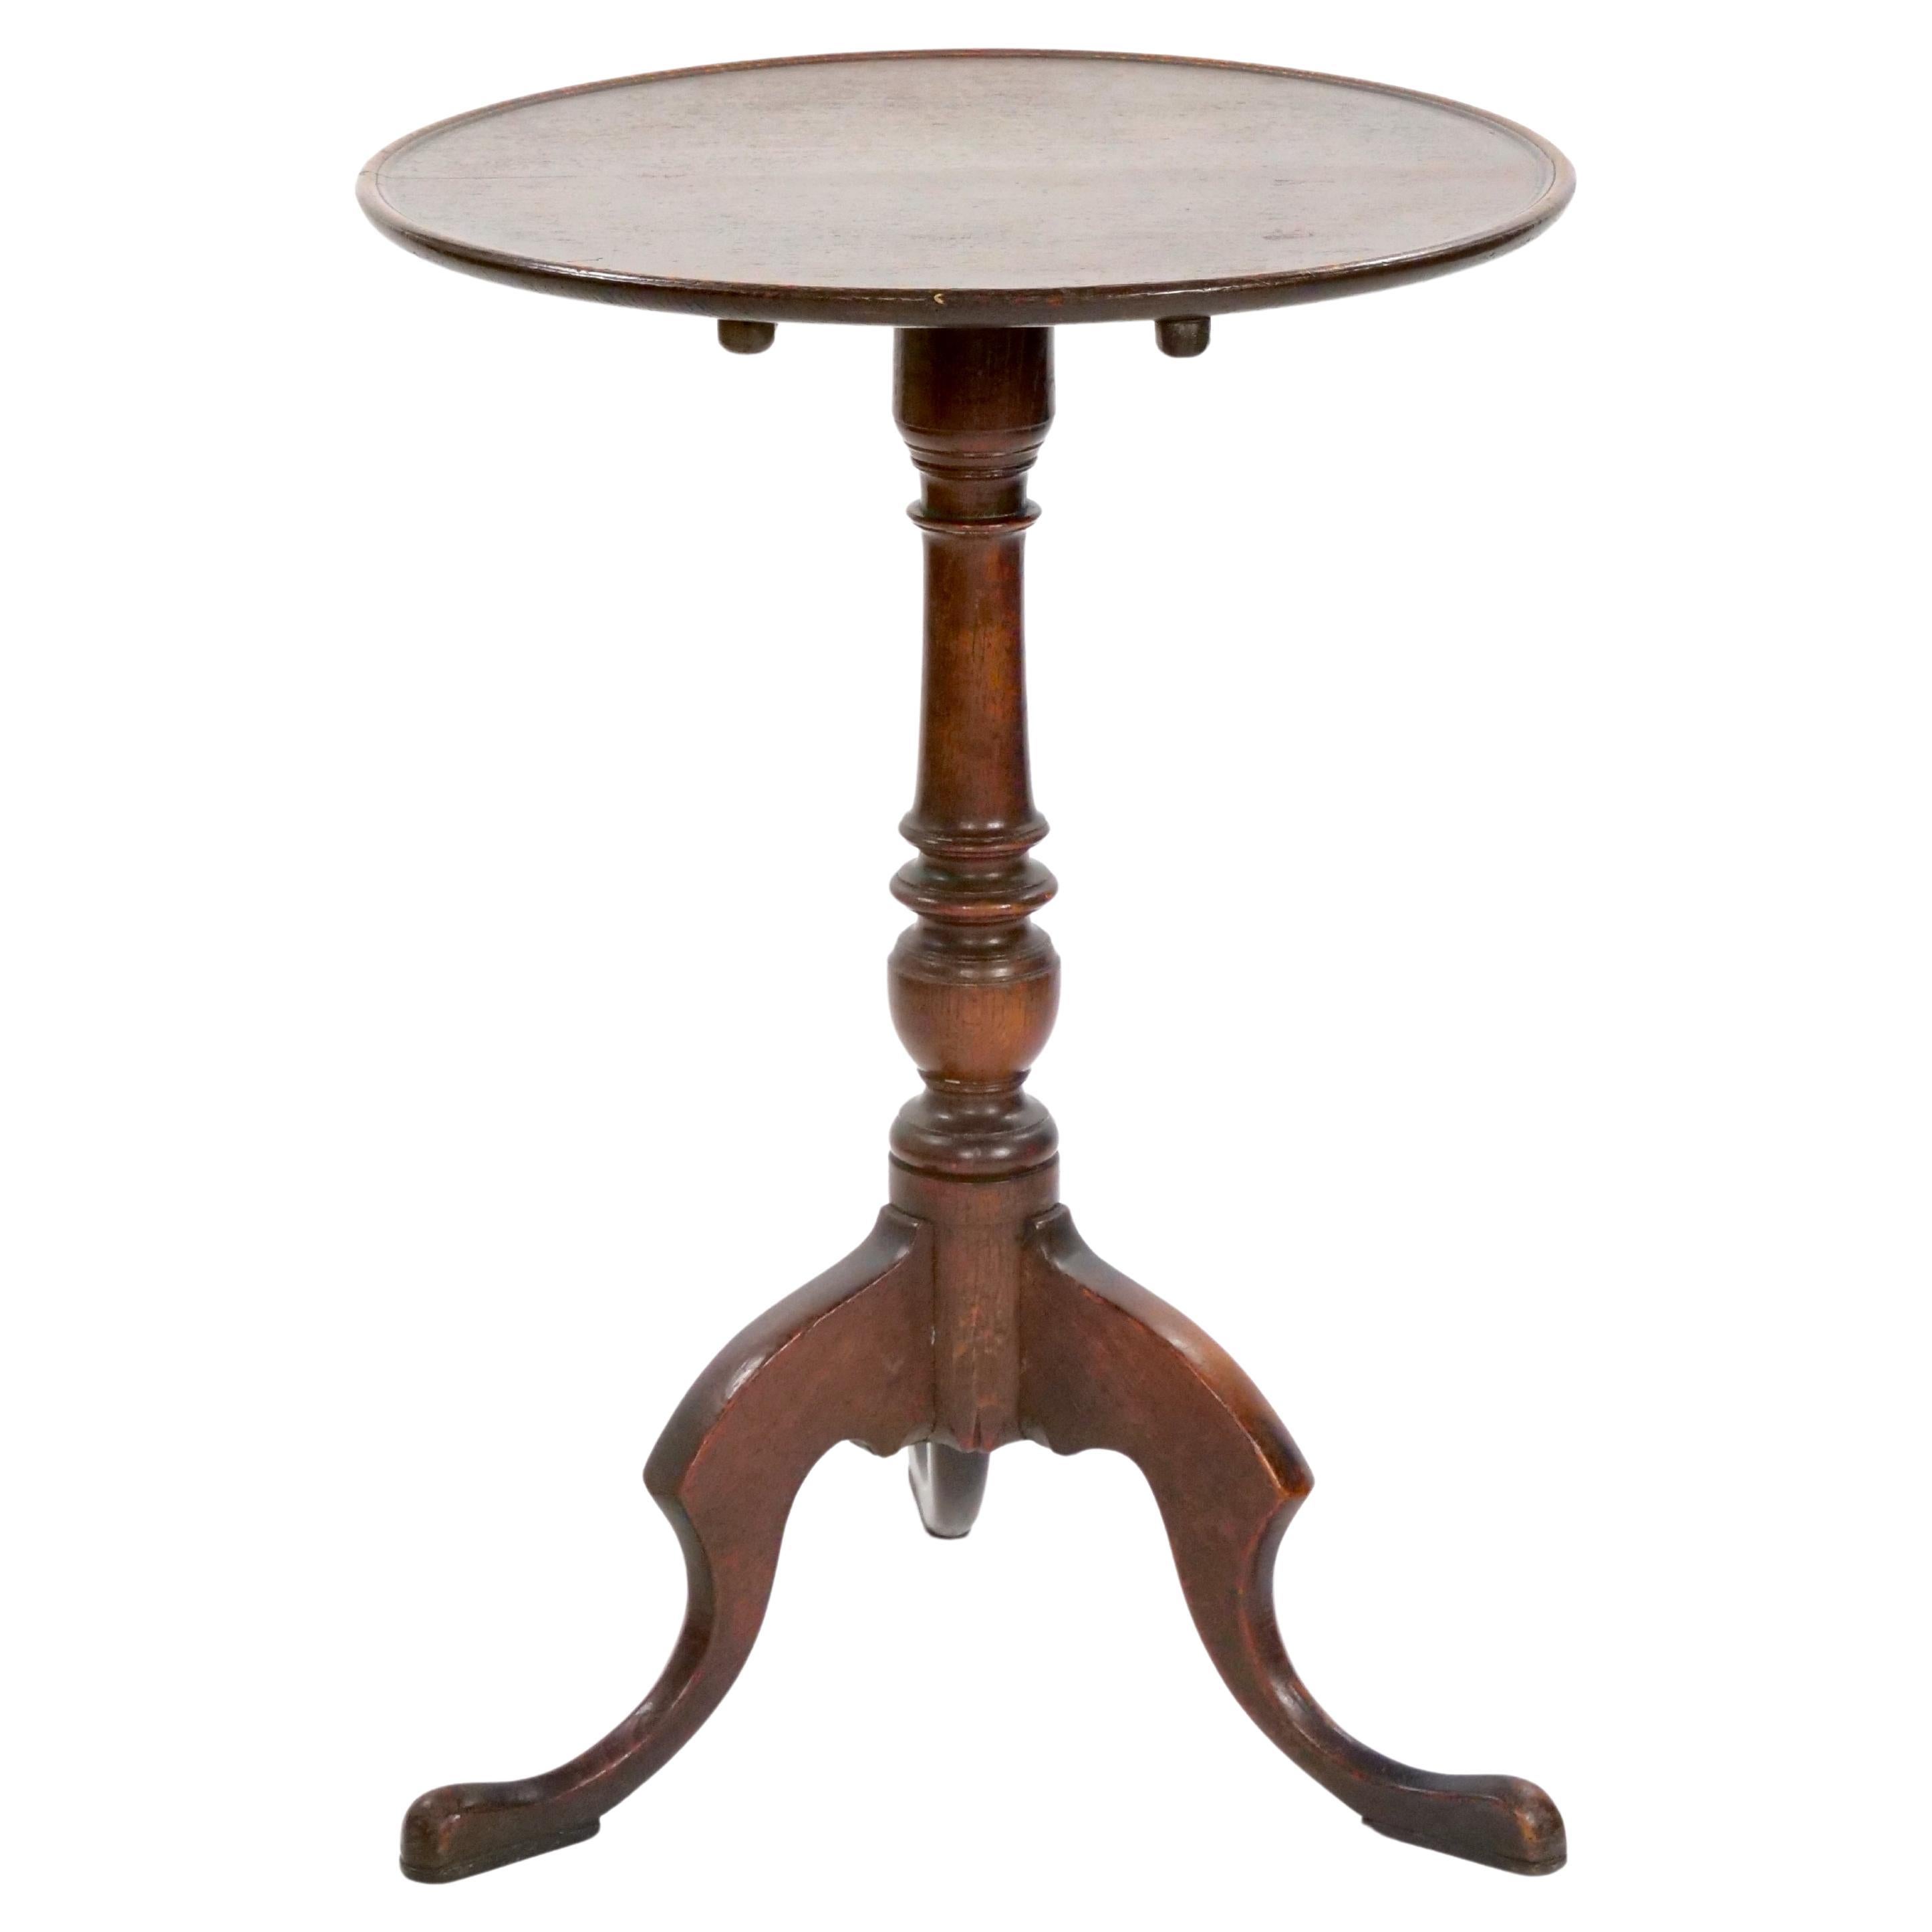 19th Century Victorian Mahogany Tripod Pedestal Candle Stand For Sale